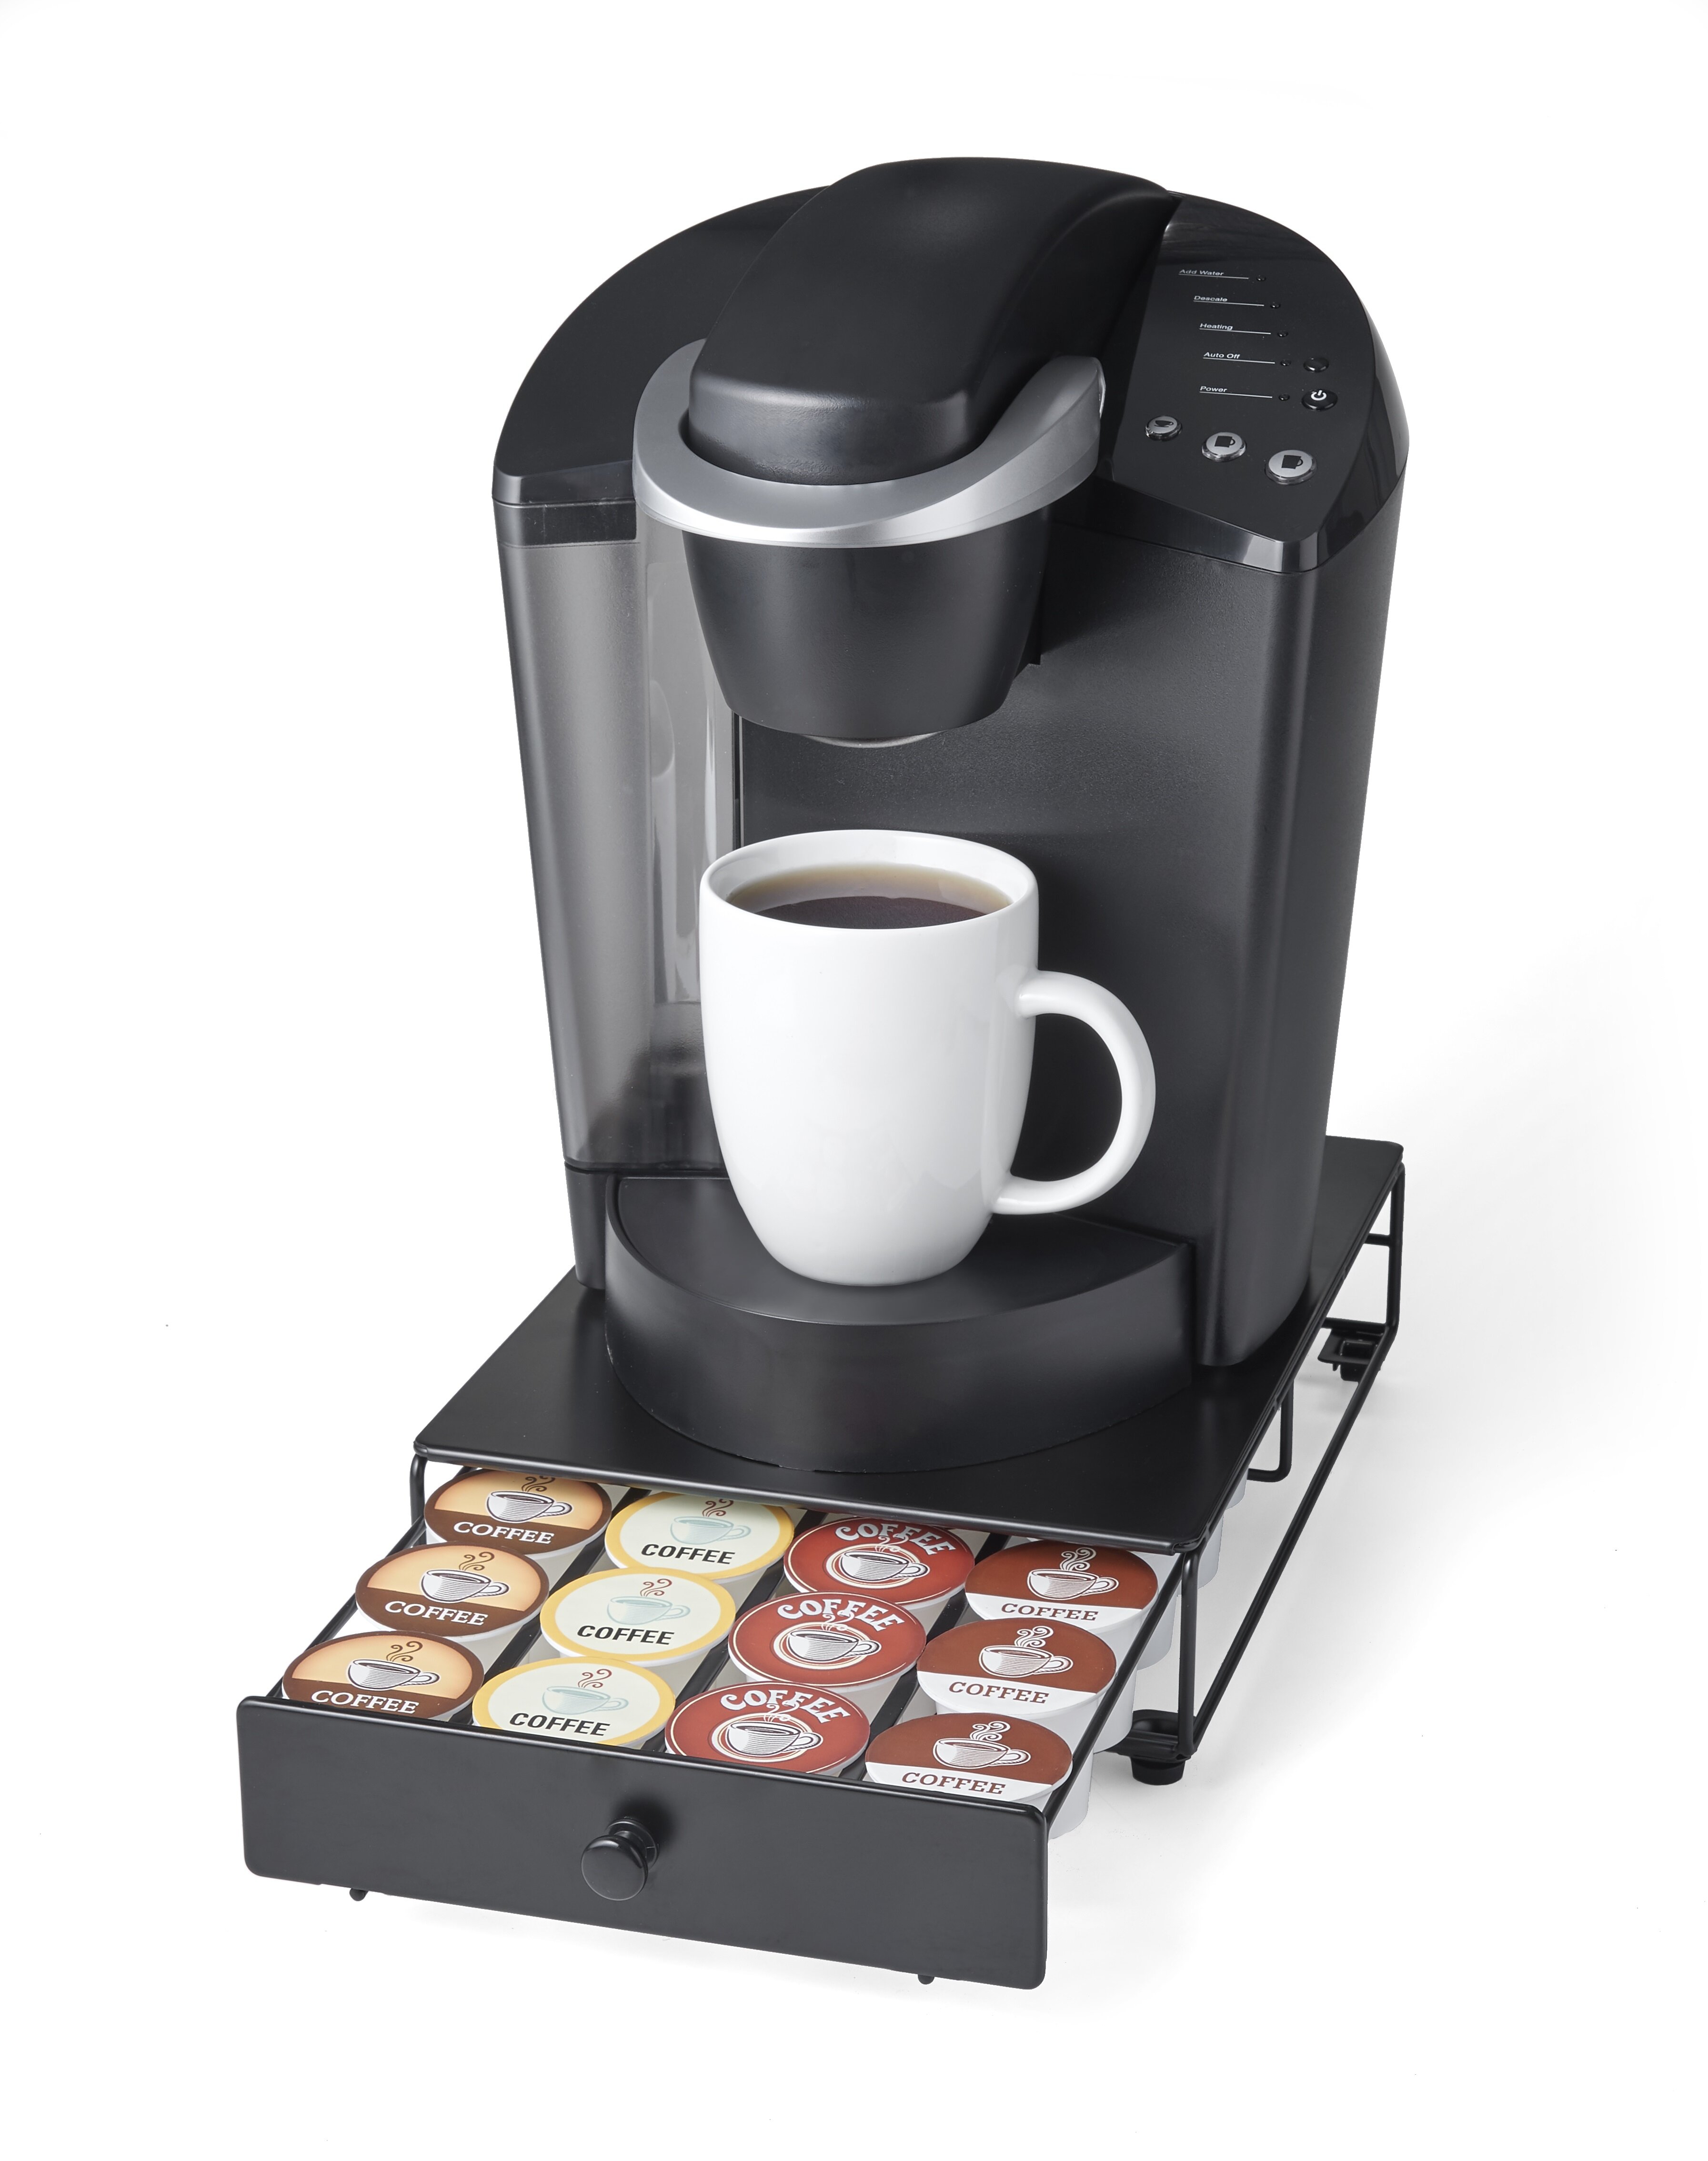 Keurig Coffee Maker Brewer K-Cup Pod Holder and 50 similar items